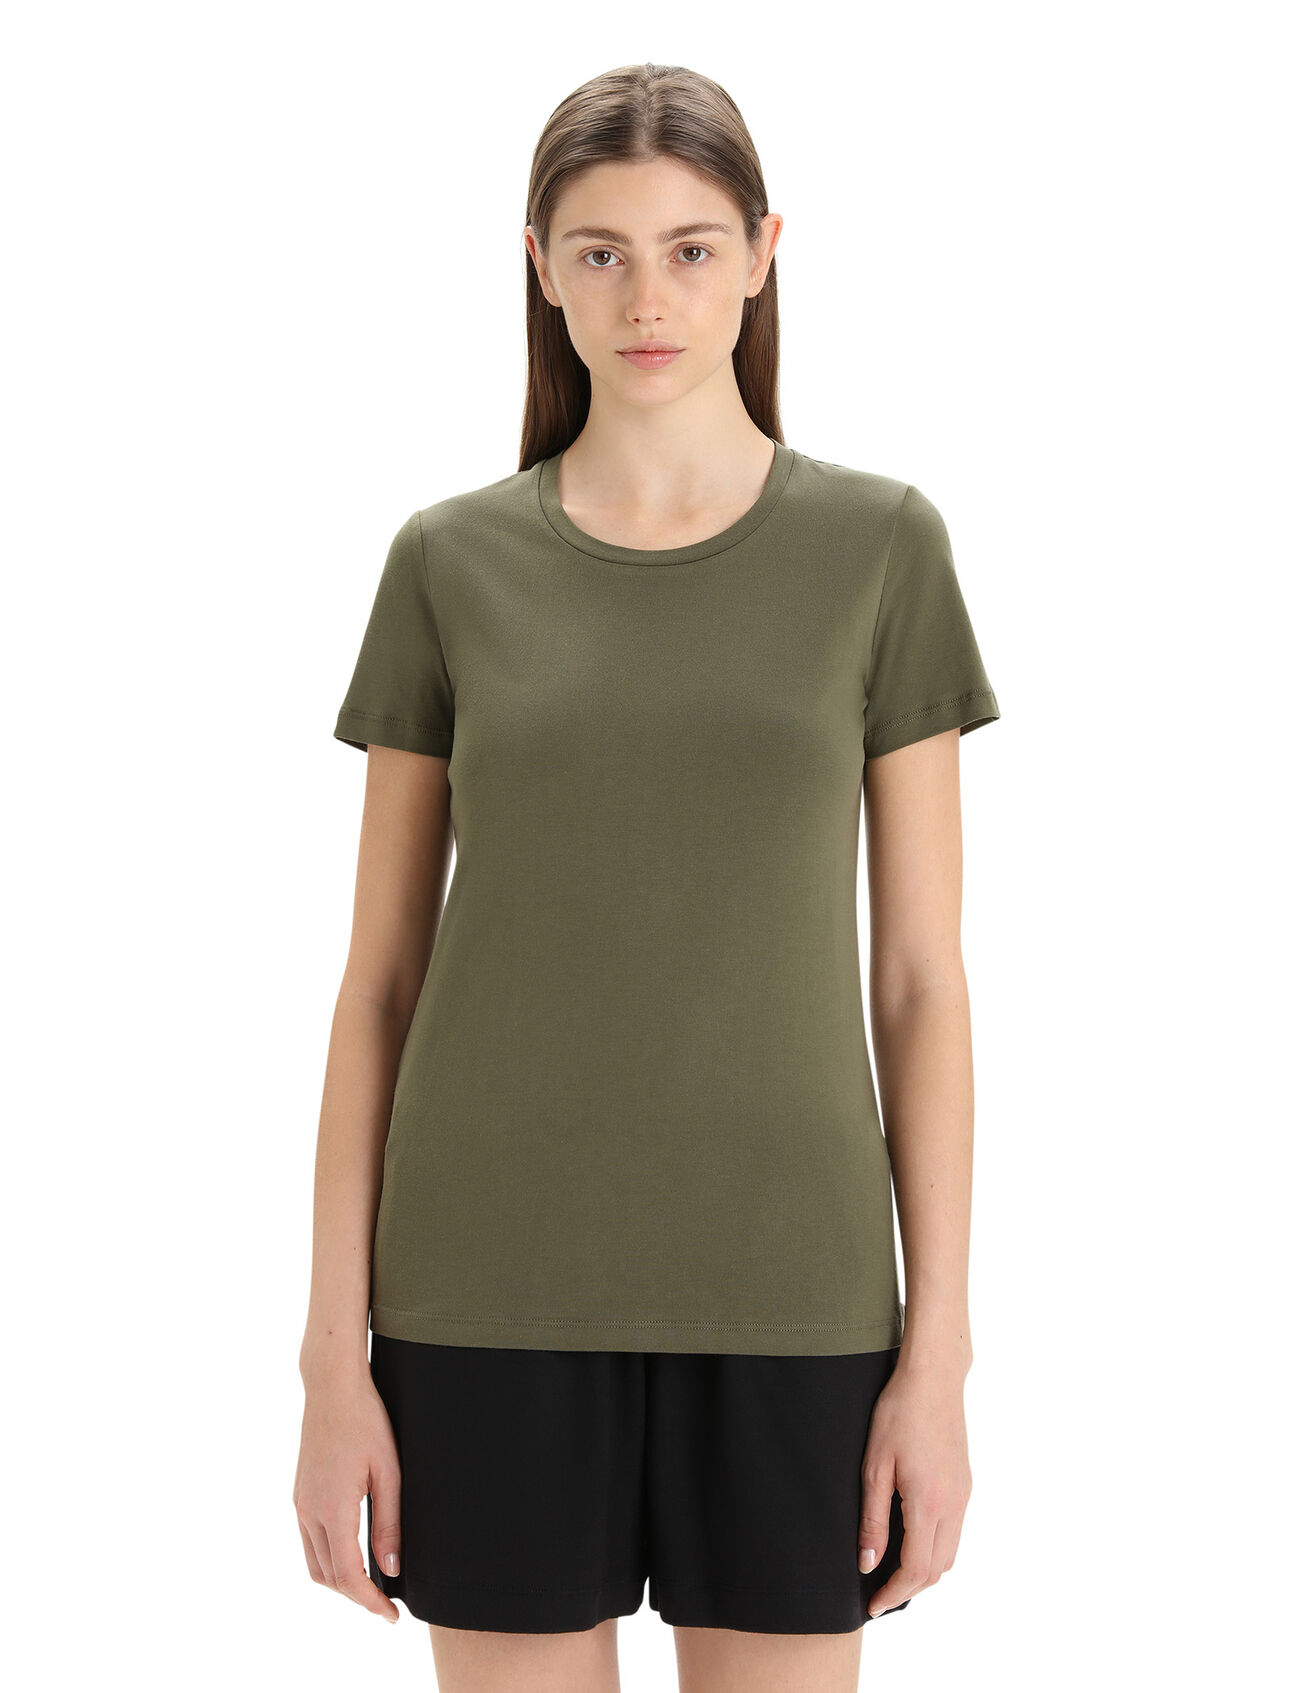 Womens Tencel™  Cotton Short Sleeve T-Shirt A clean and comfortable everyday tee with classic style, the TENCEL™ Cotton Short Sleeve Tee features a super-soft jersey fabric that blends organic cotton with natural TENCEL™.